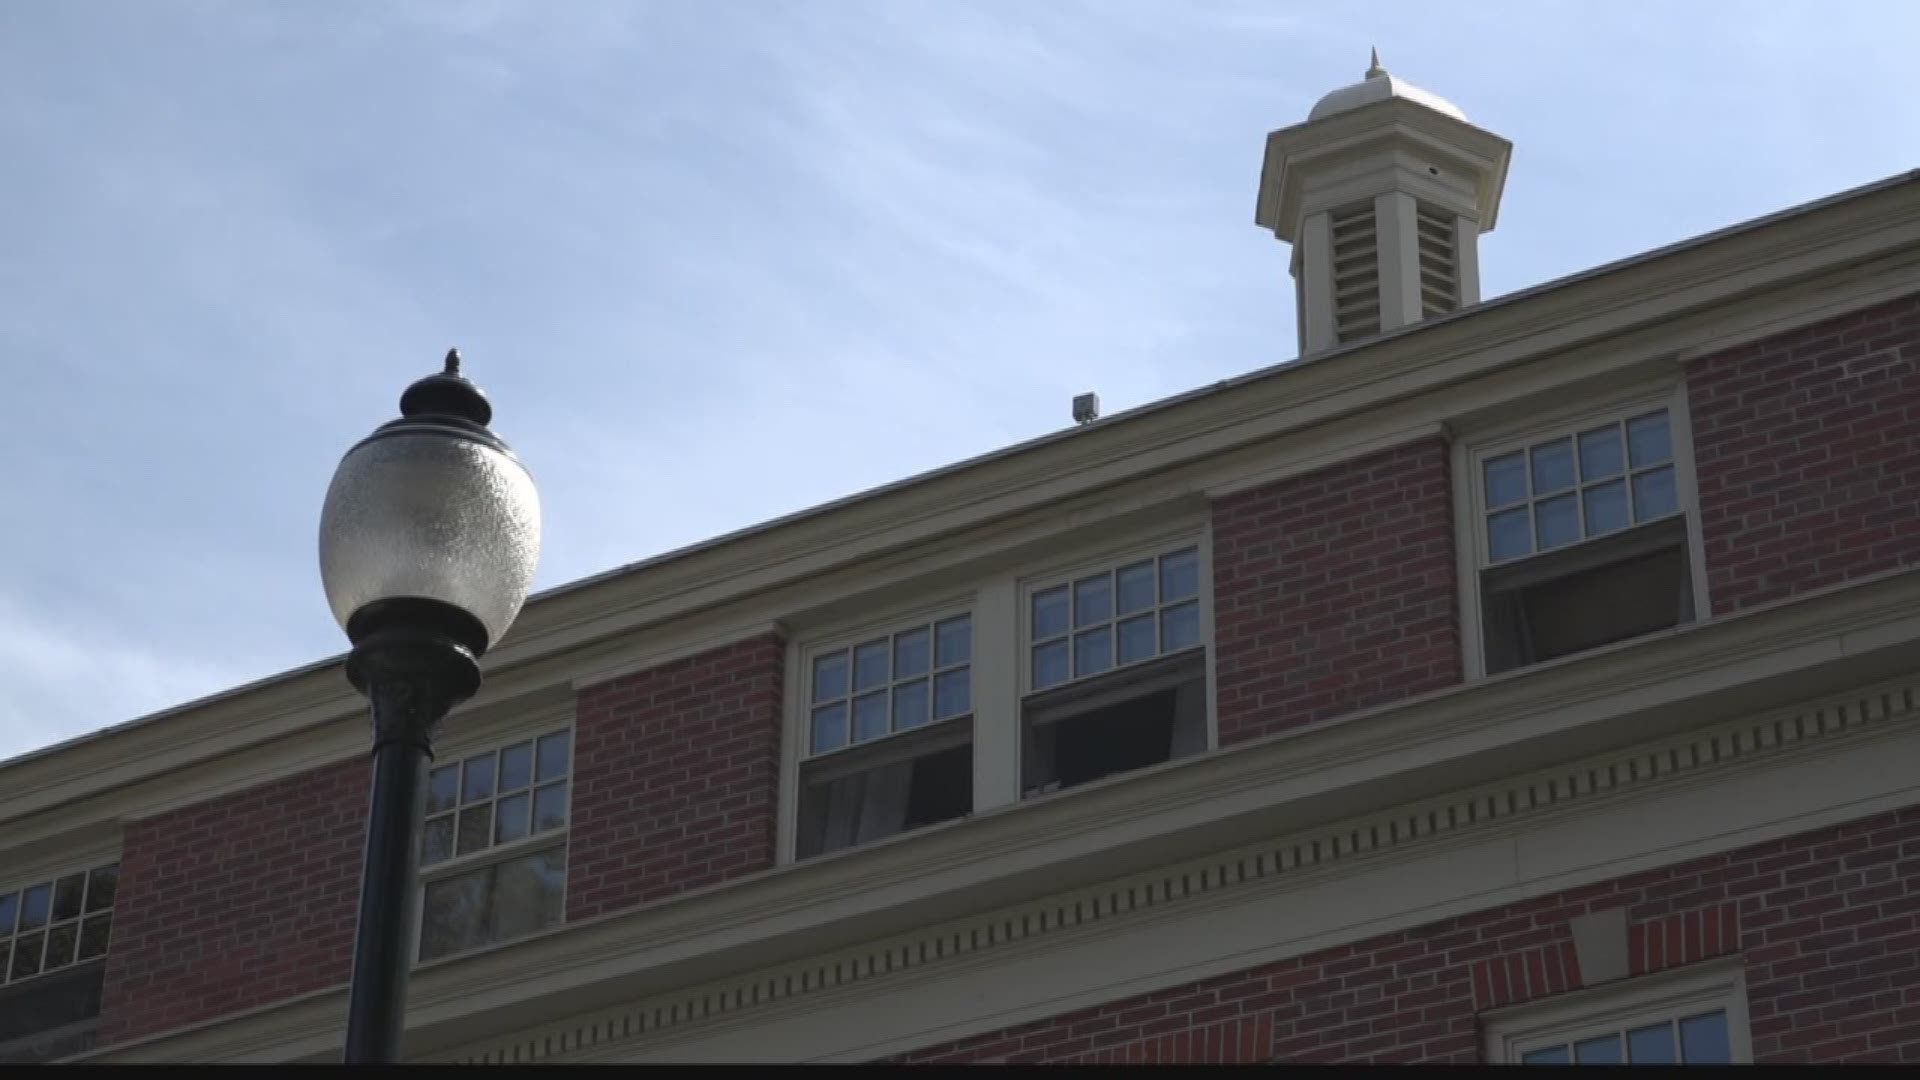 WSU looks into window safety after student falls from dorm window. Alexa Block reports.